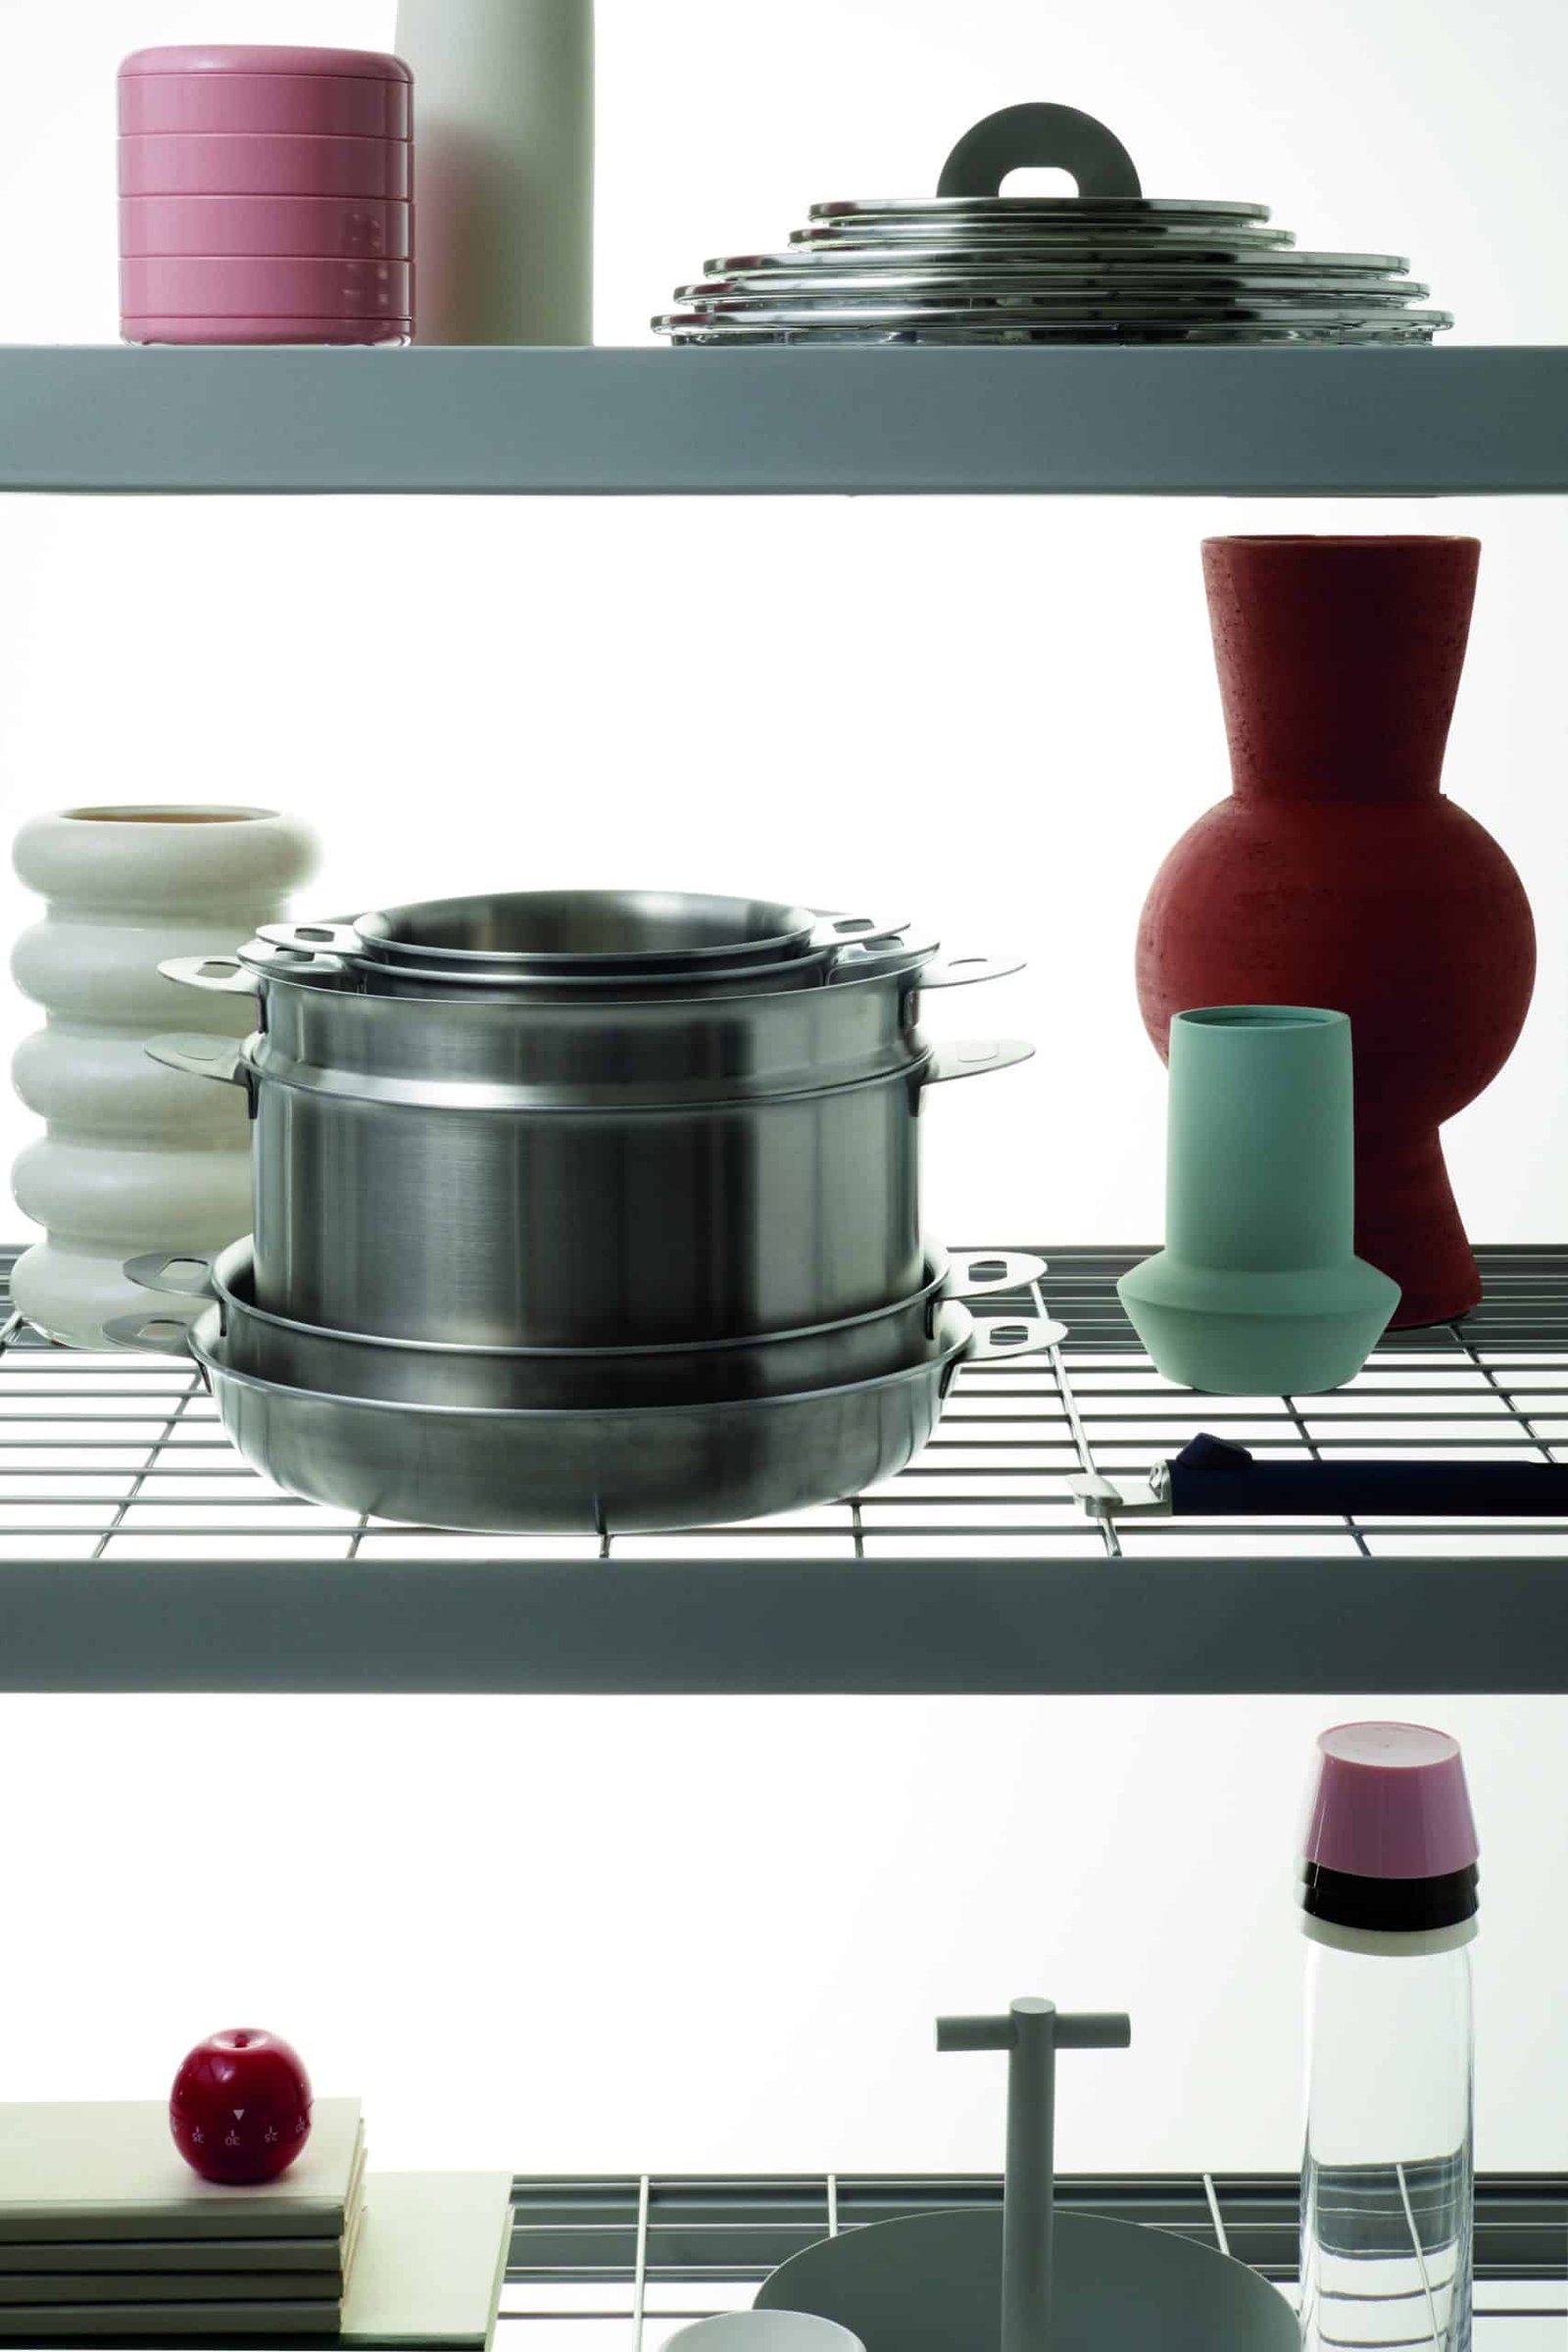 A shelf filled with an extensive selection of purposeful pots and pans.